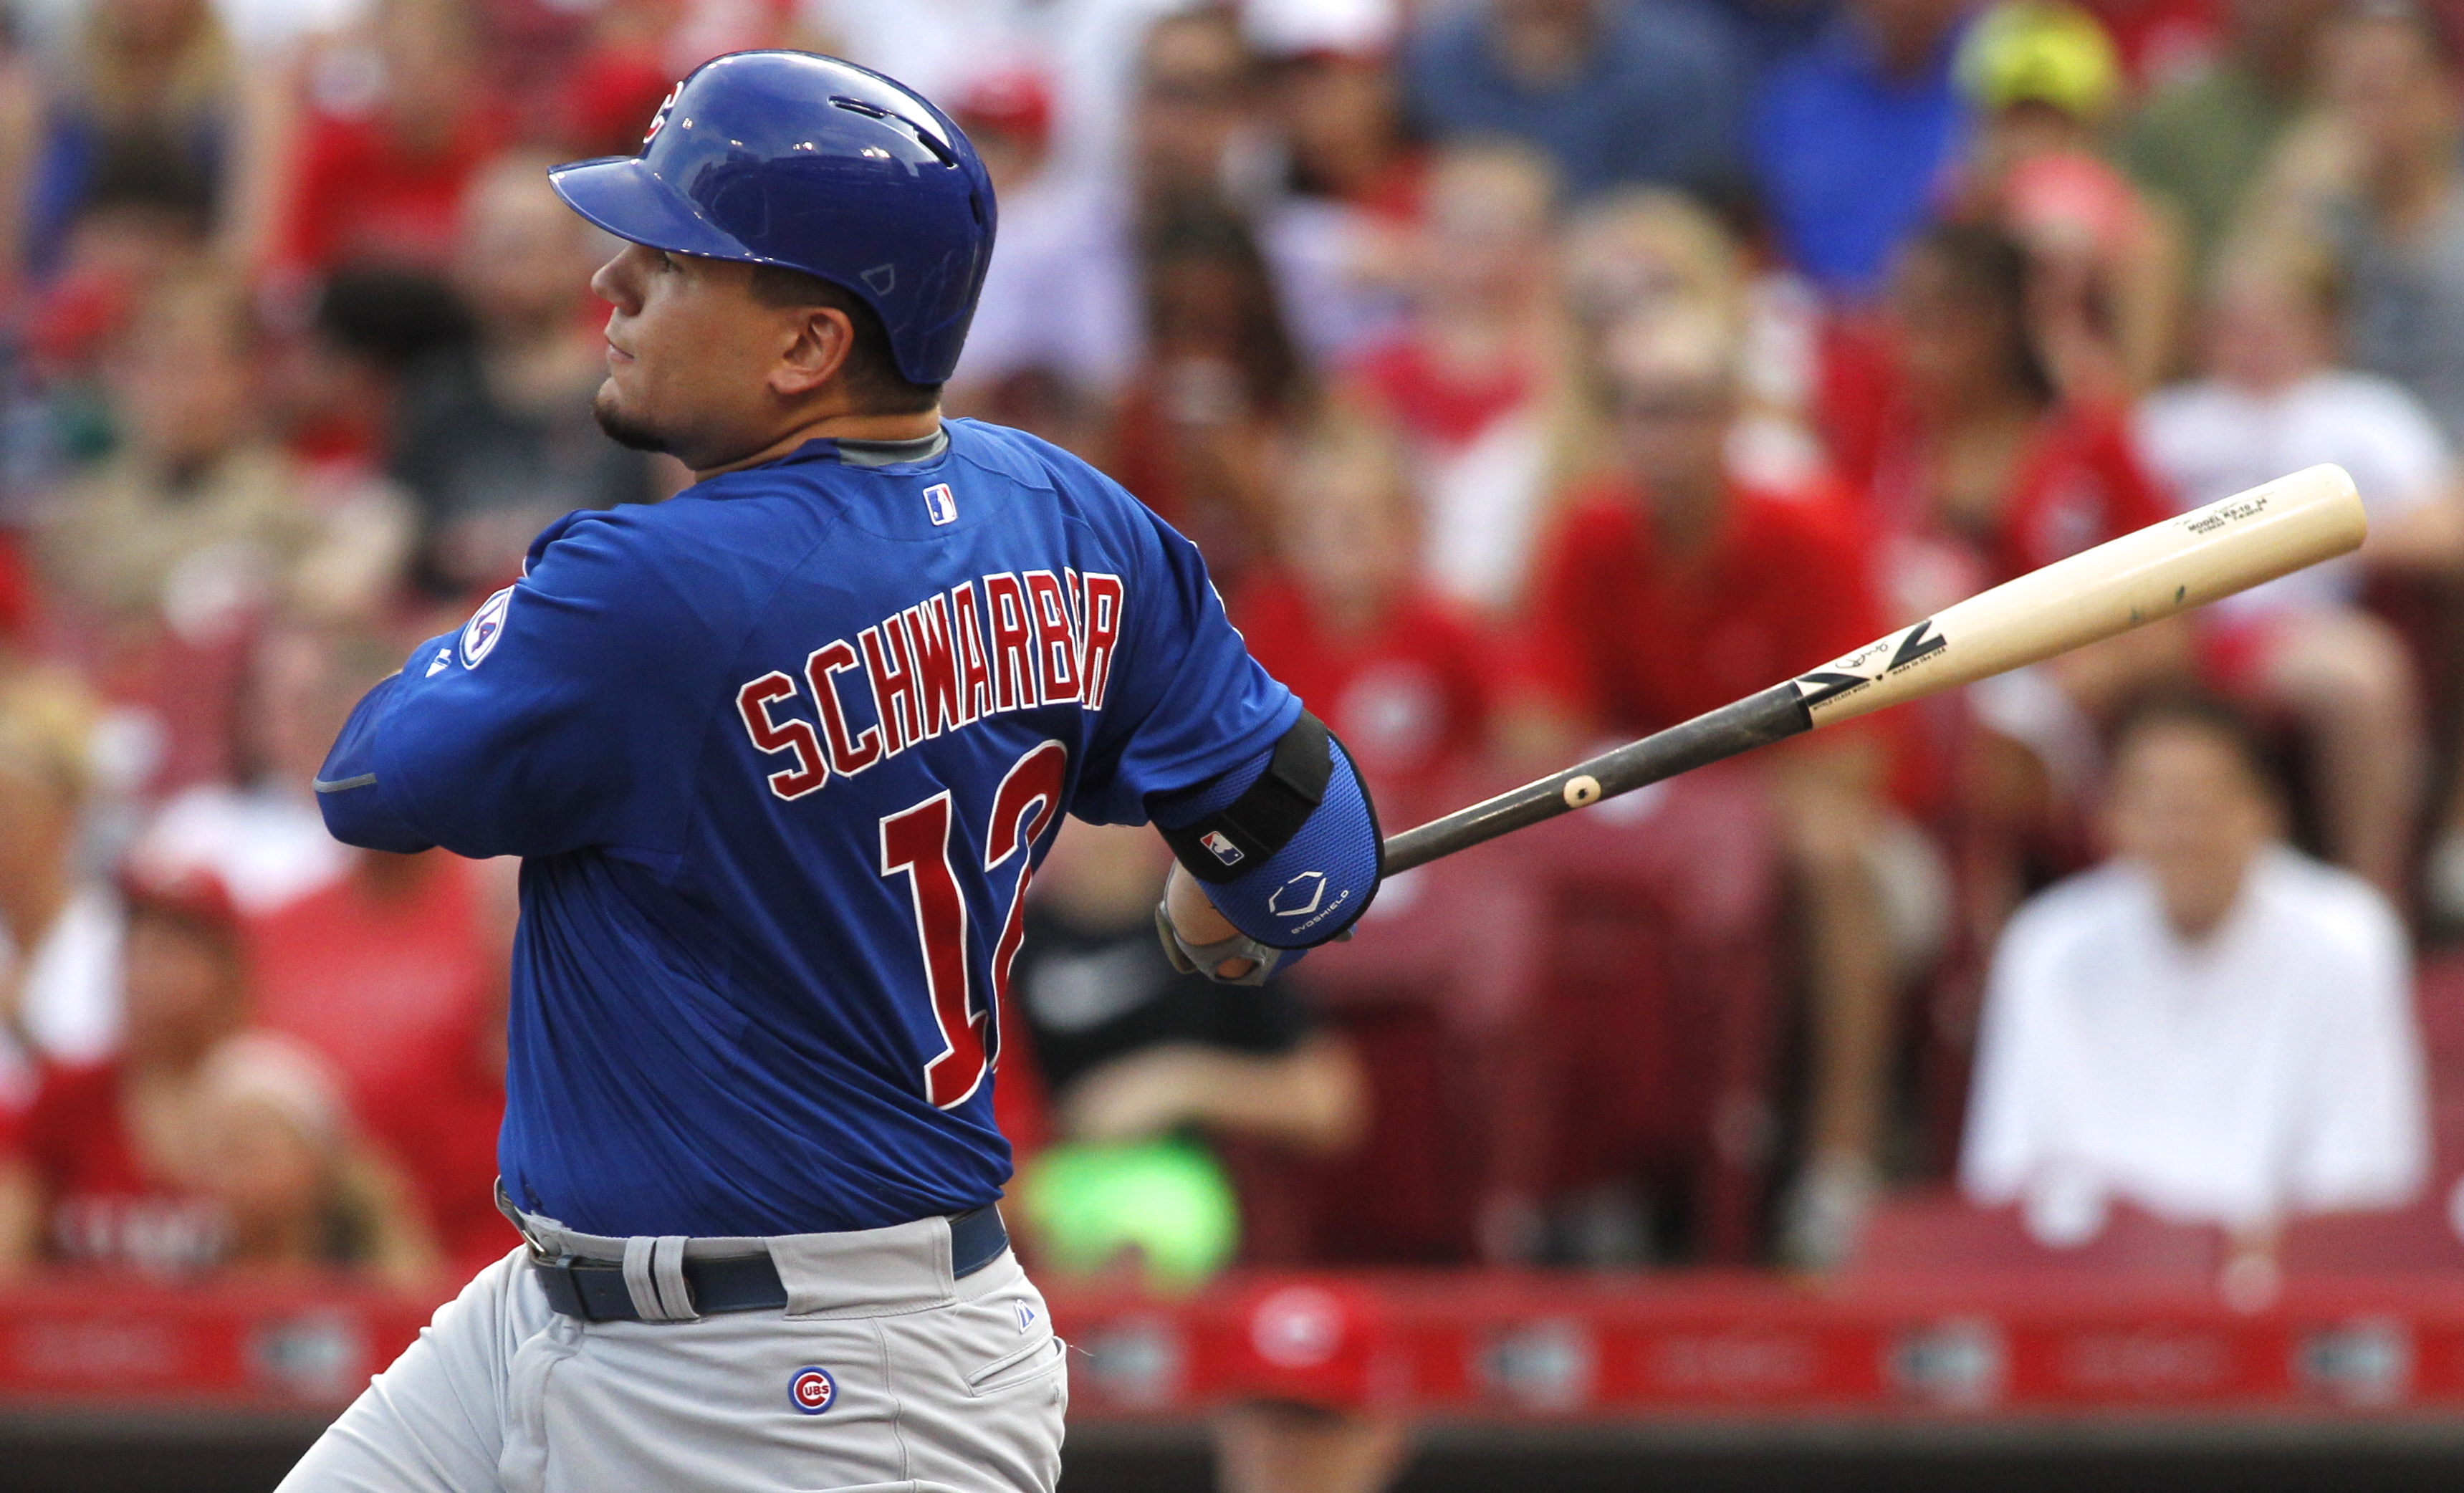 Middletown's Schwarber on his way back up to major leagues